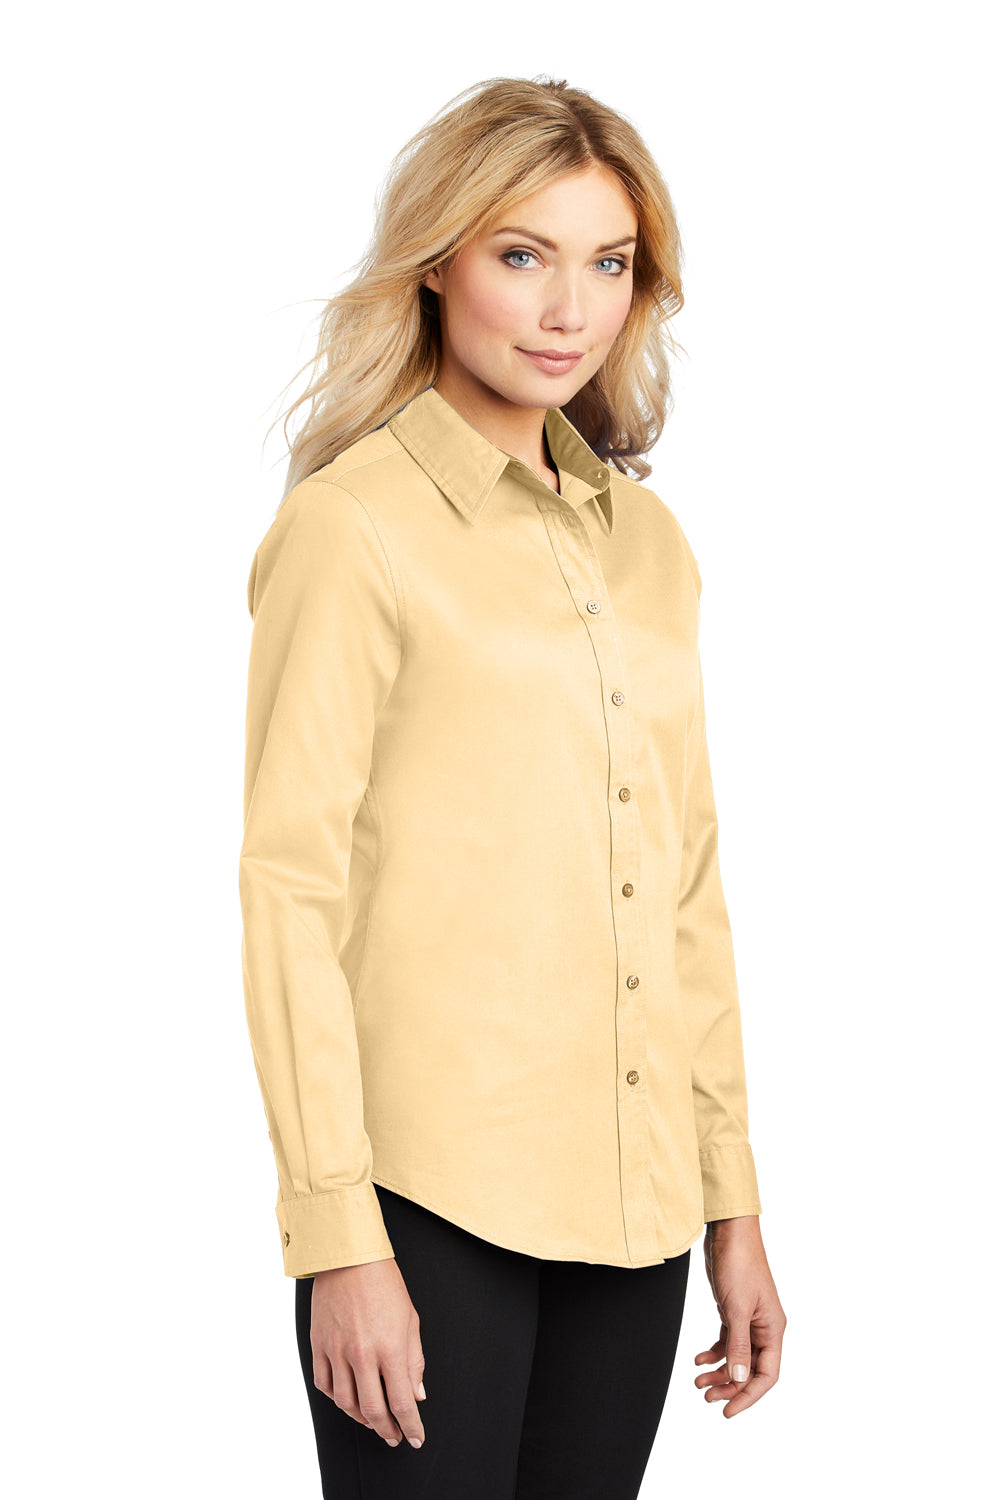 Port Authority L608 Womens Easy Care Wrinkle Resistant Long Sleeve Button Down Shirt Yellow 3Q